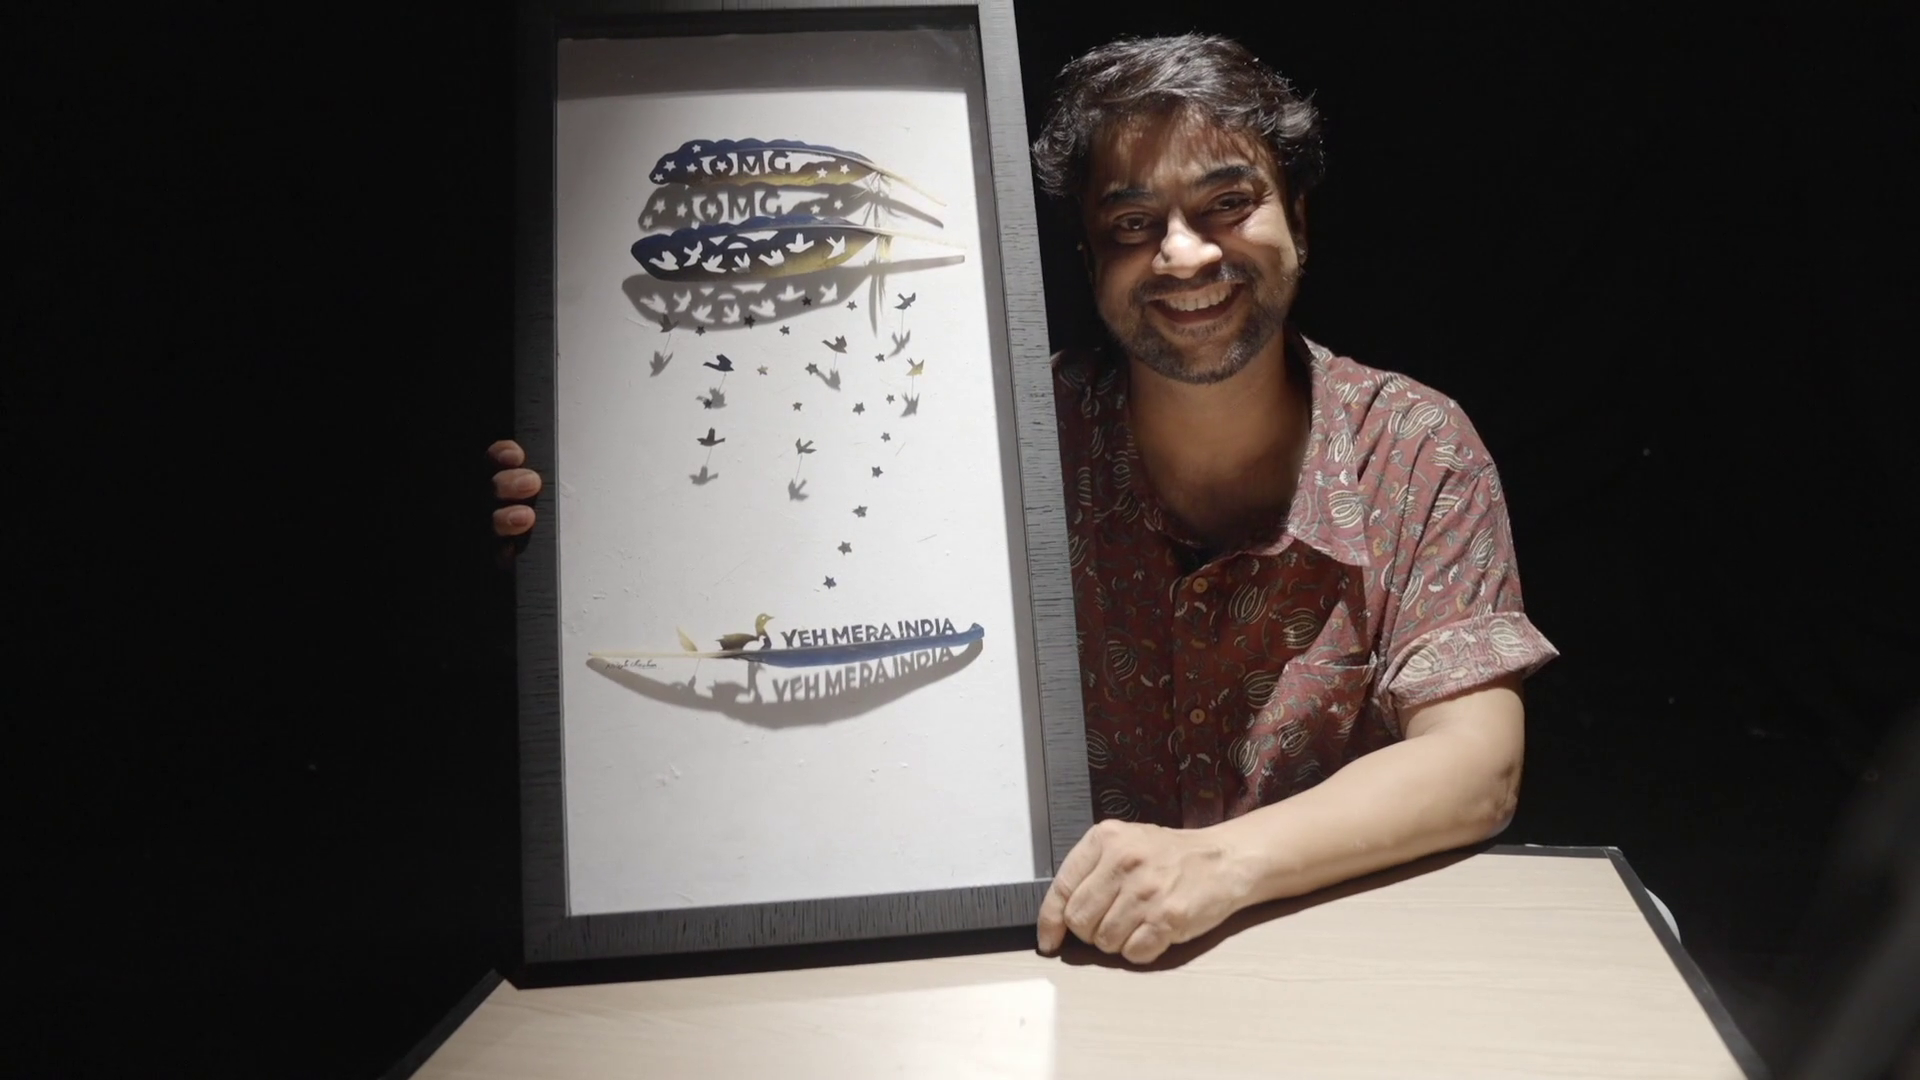 Meet the Feather Artist from Maharashtra in ‘OMG! Yeh Mera India’ on HistoryTV18!